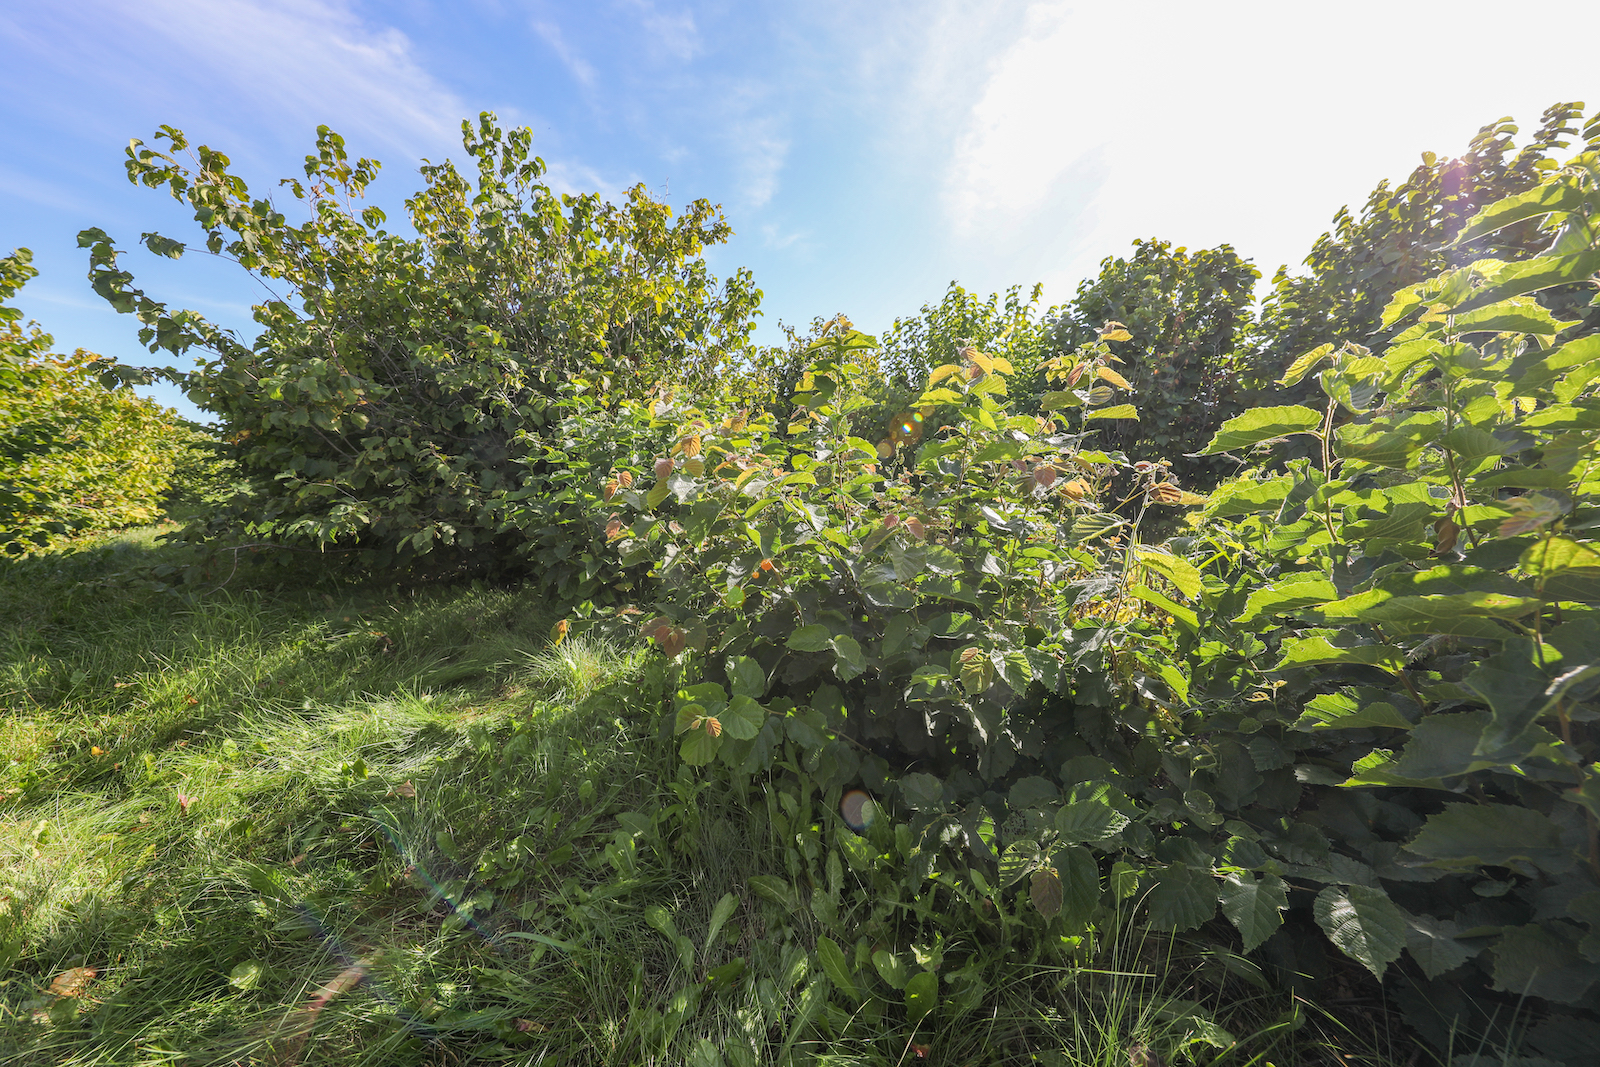 A large hazelnut shrub, green and leafy and in a sunny field.